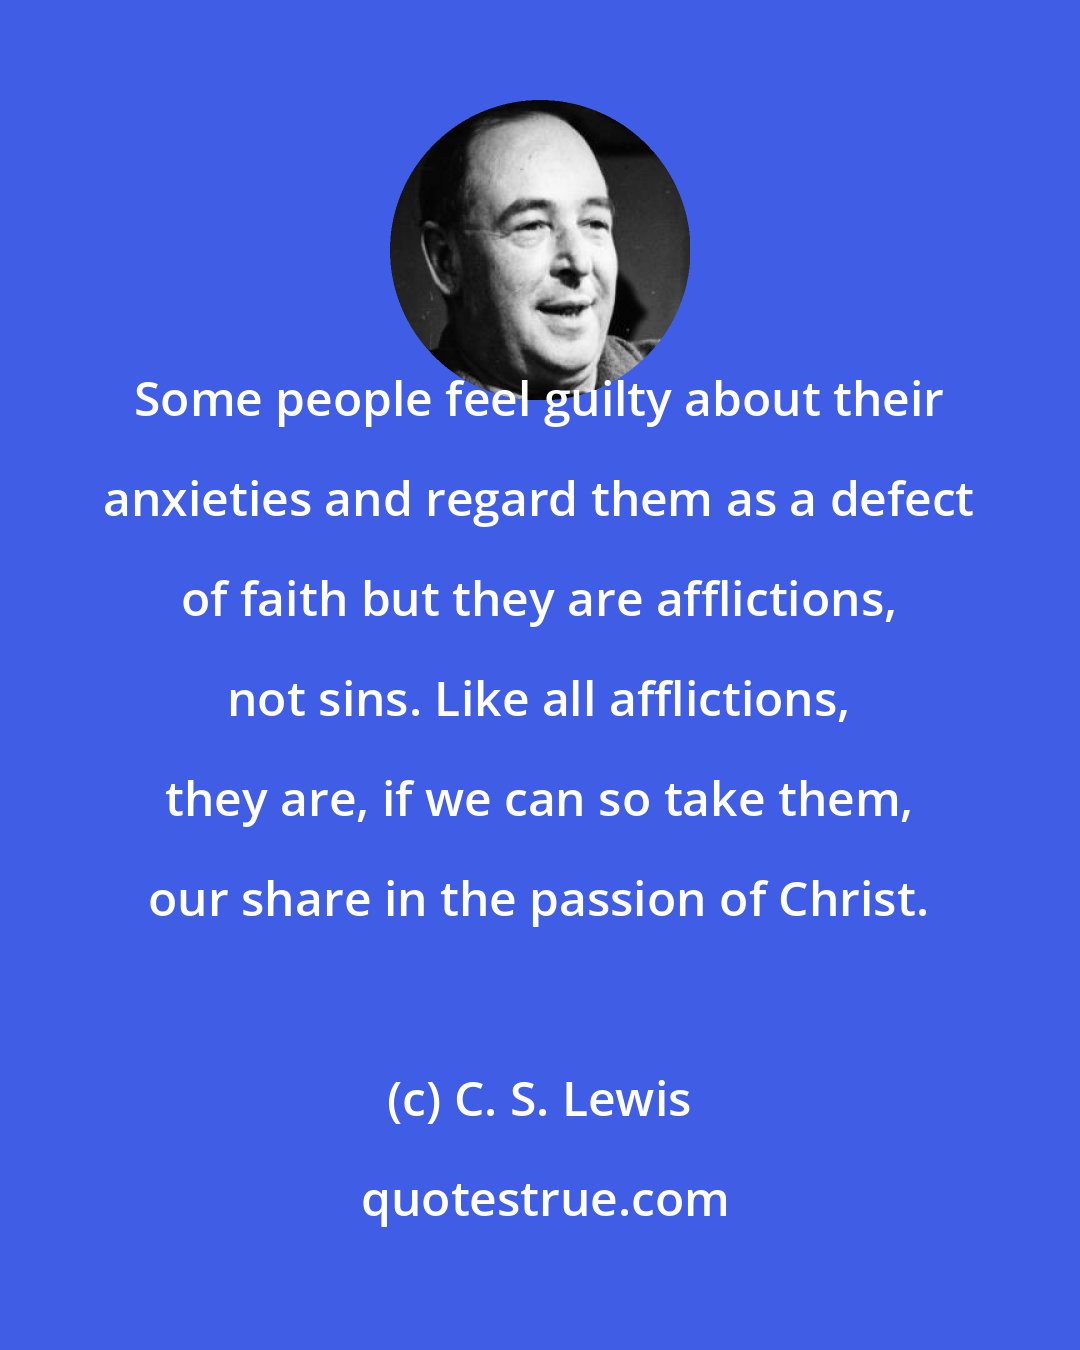 C. S. Lewis: Some people feel guilty about their anxieties and regard them as a defect of faith but they are afflictions, not sins. Like all afflictions, they are, if we can so take them, our share in the passion of Christ.